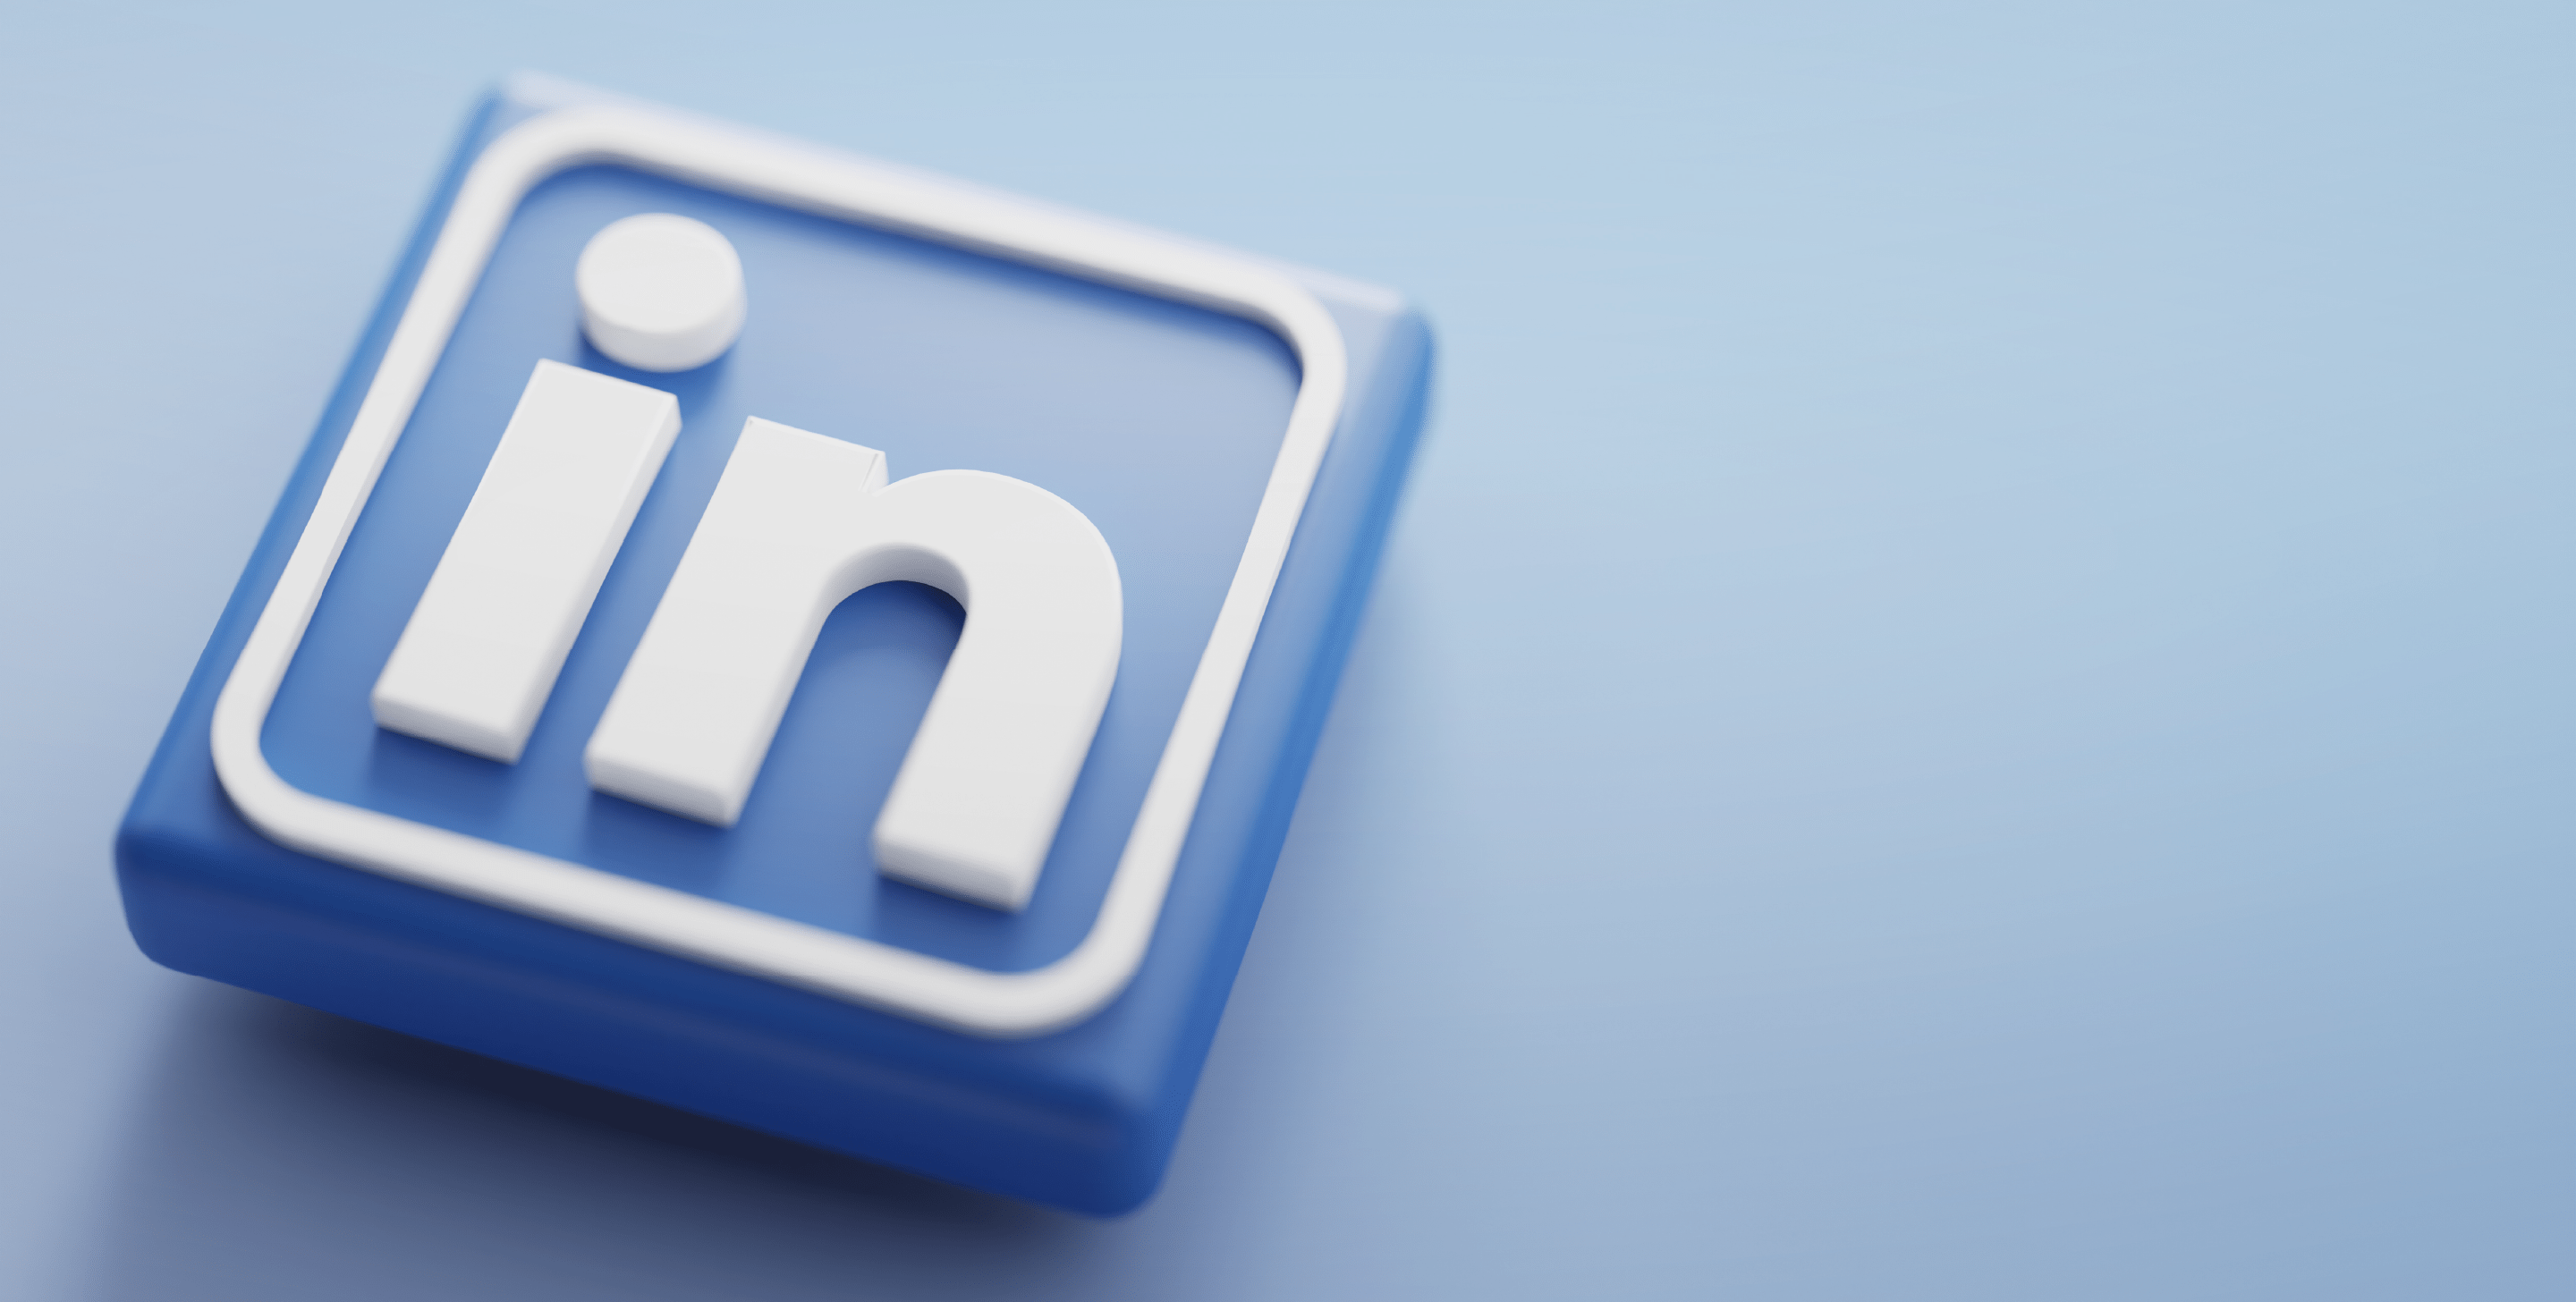 content marketing institute linkedin pages create a company page linkedin group linkedin page